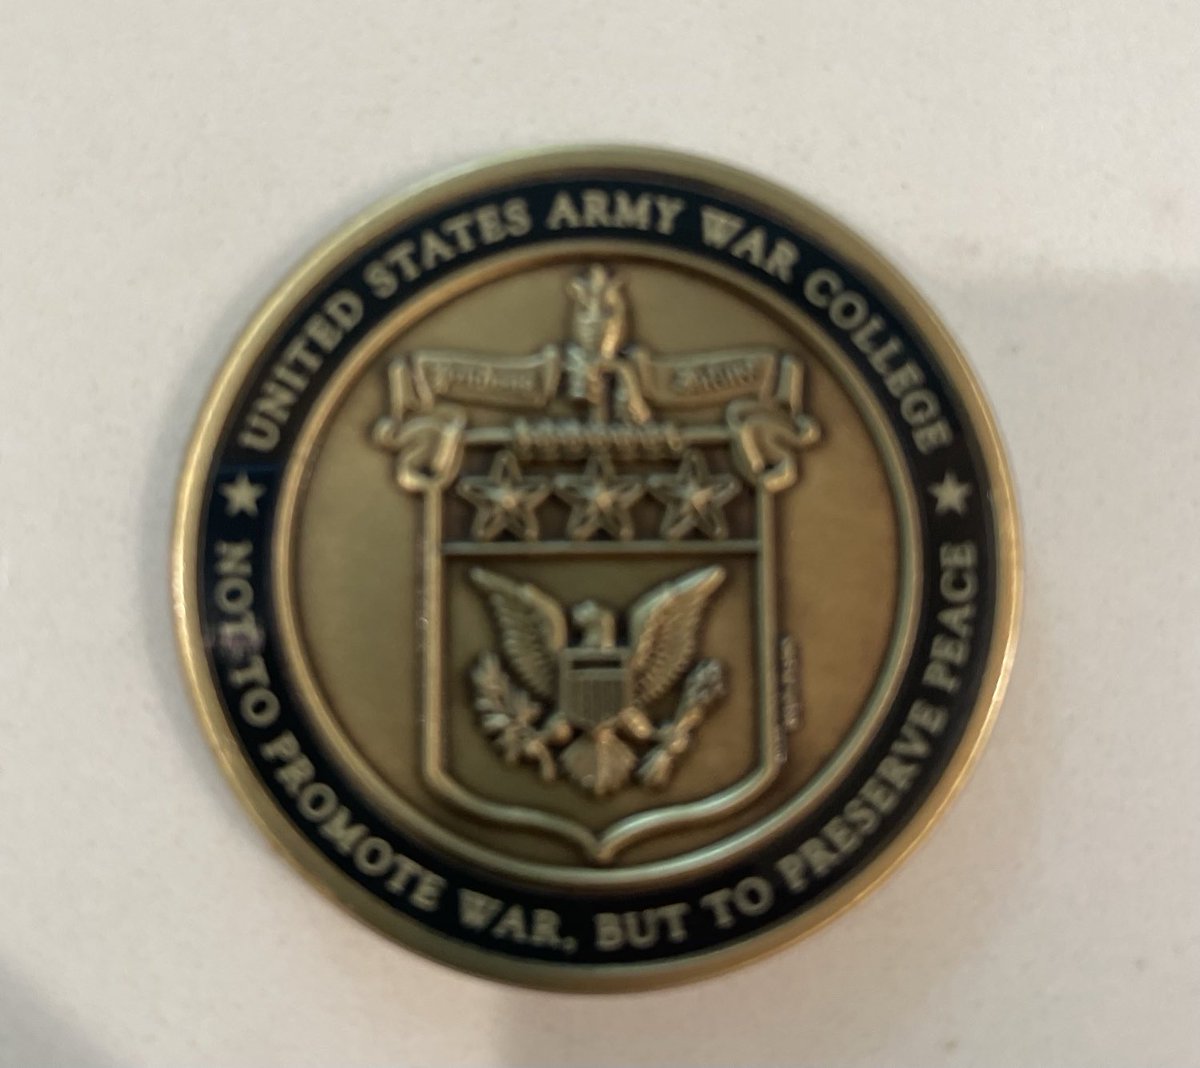 “Not to promote war, but to preserve peace” Much thanks to Army War College for hosting me today to talk AI and the future